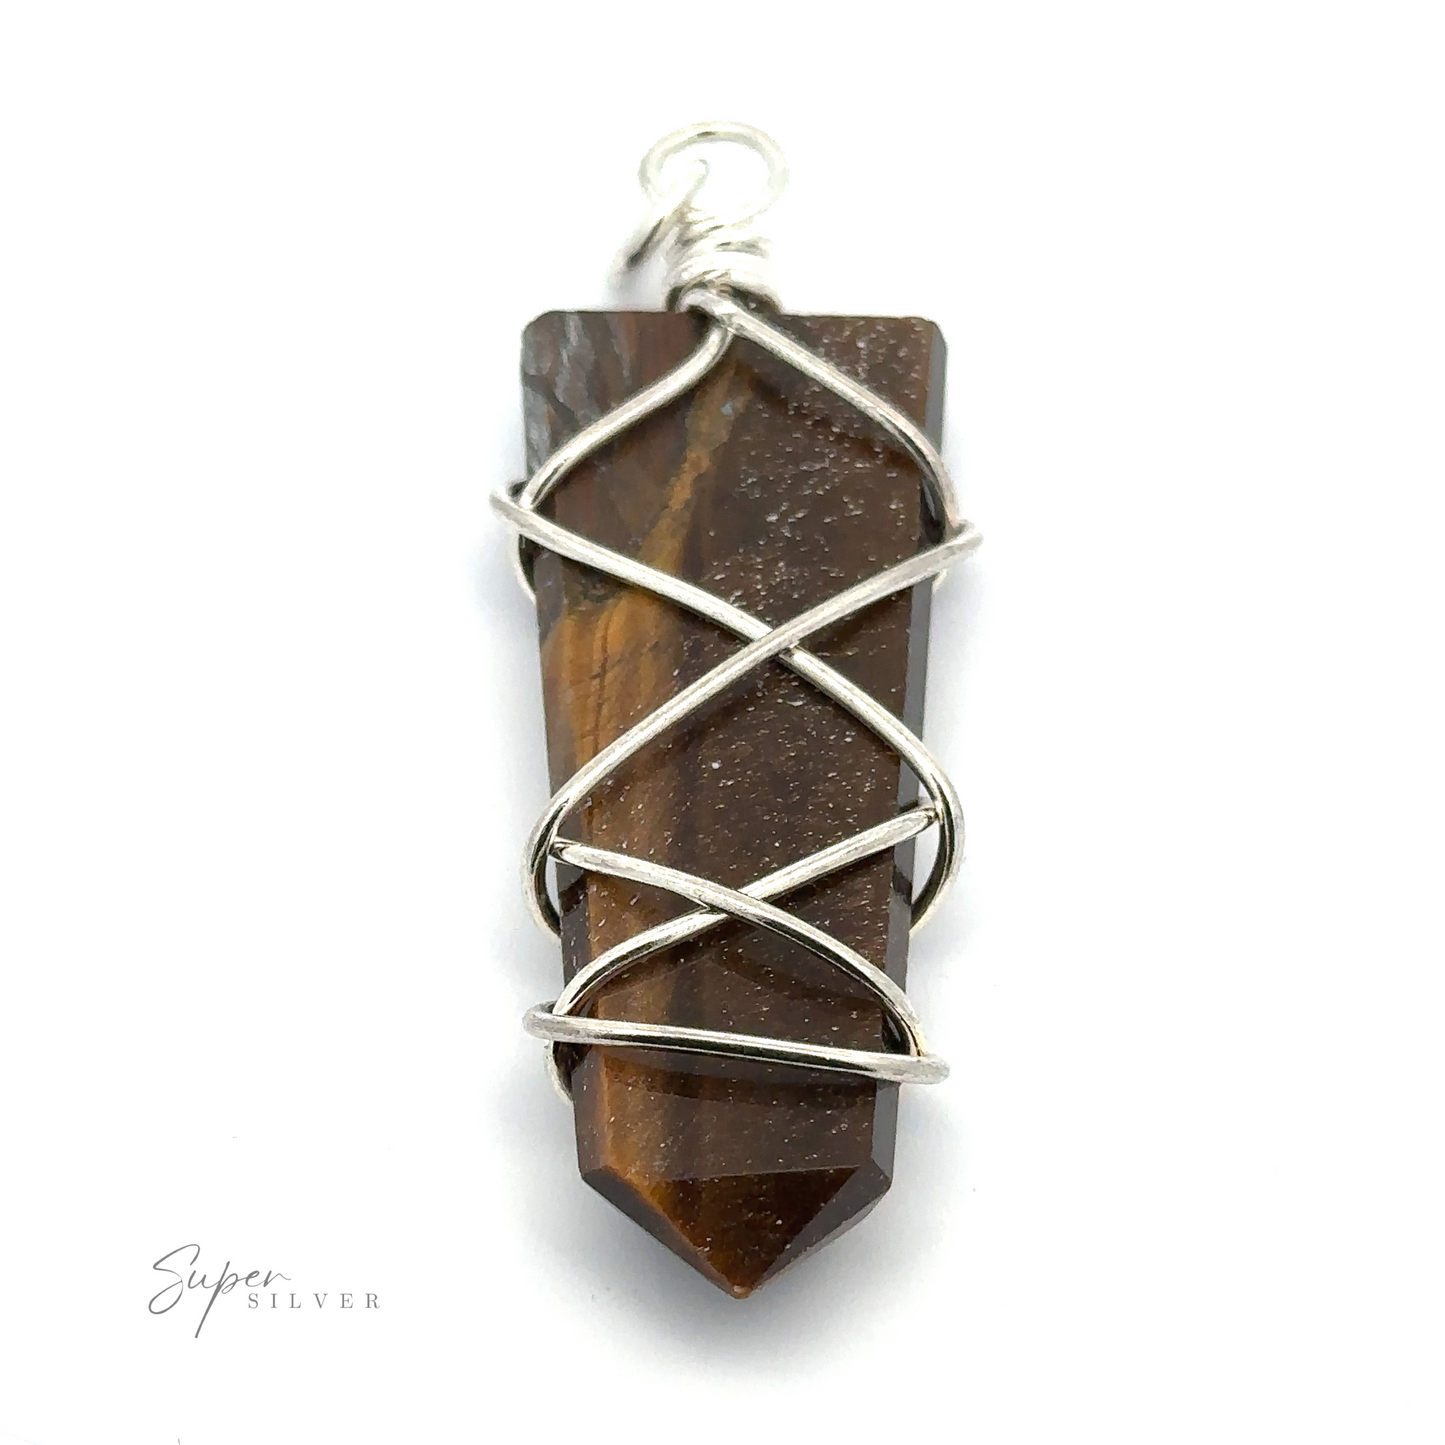 
                  
                    A Stone Slab Pendant with Wire Wrapping with a pointed end, wrapped with silver wire in a crisscross pattern and featuring a silver loop for attaching. "Super Silver" is inscribed in small text at the bottom left. This exquisite piece of wire-wrapped jewelry seamlessly combines mixed metals, creating an elegant and unique design.
                  
                